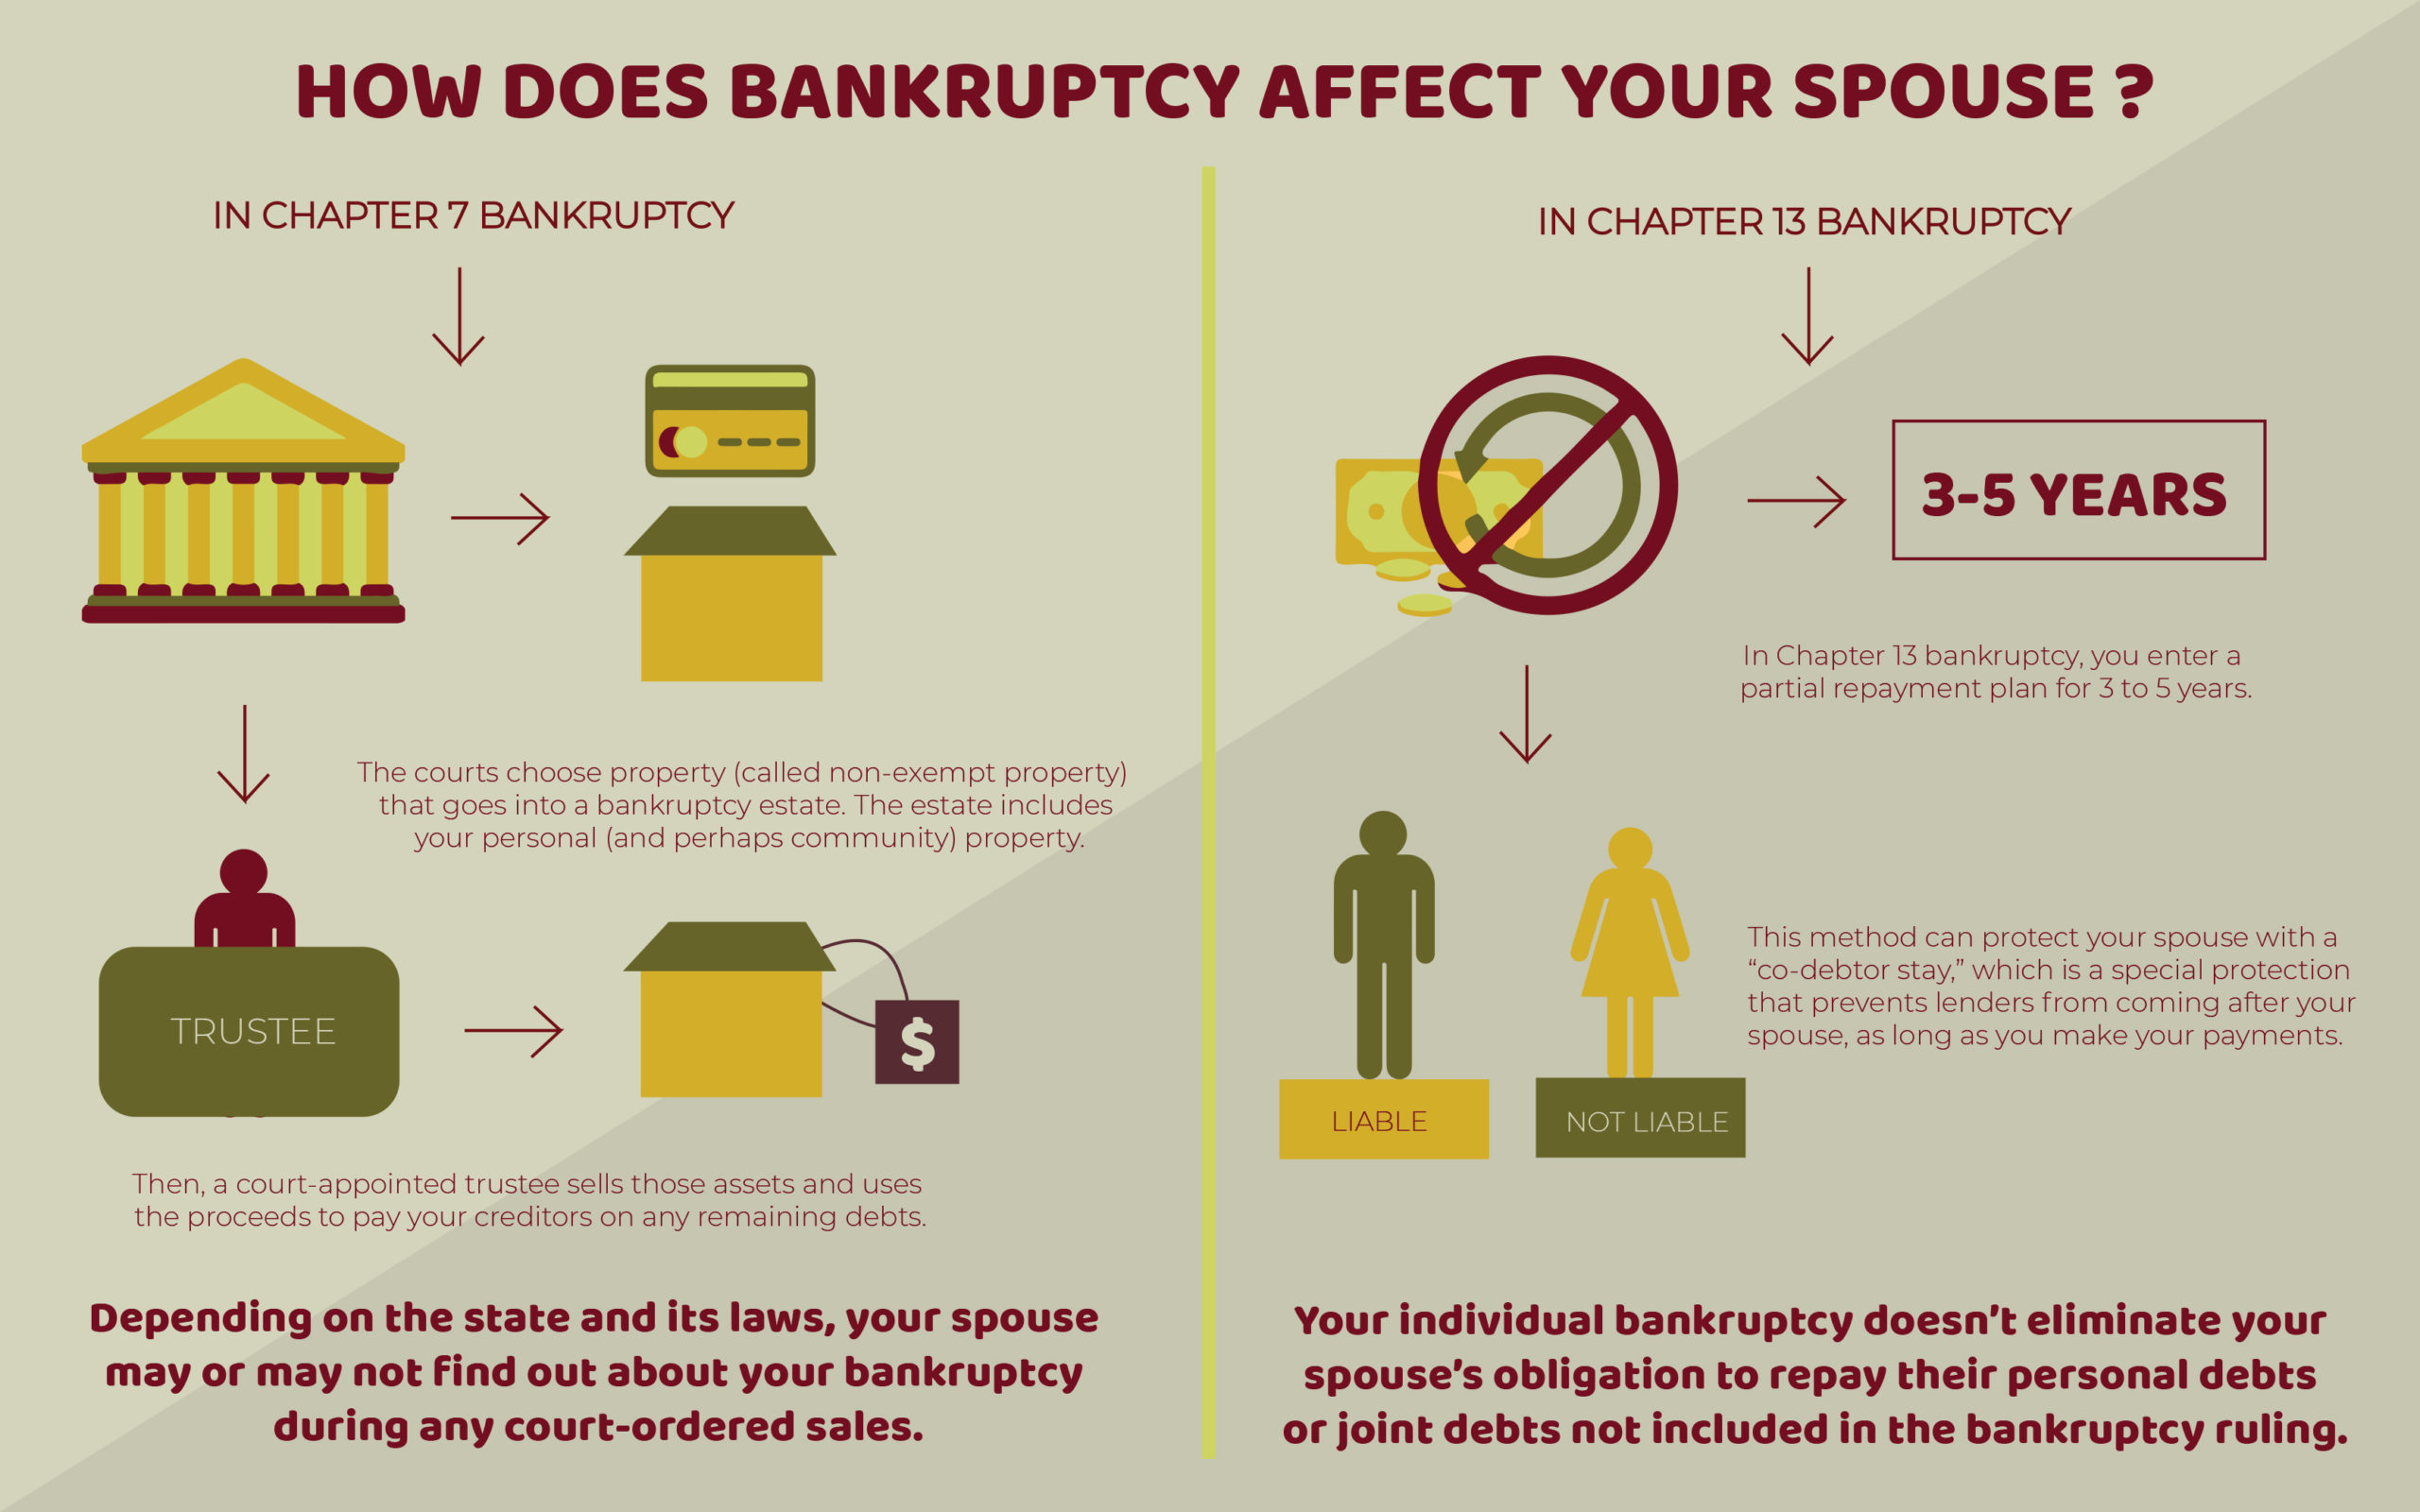 How does bankruptcy affect your spouse?